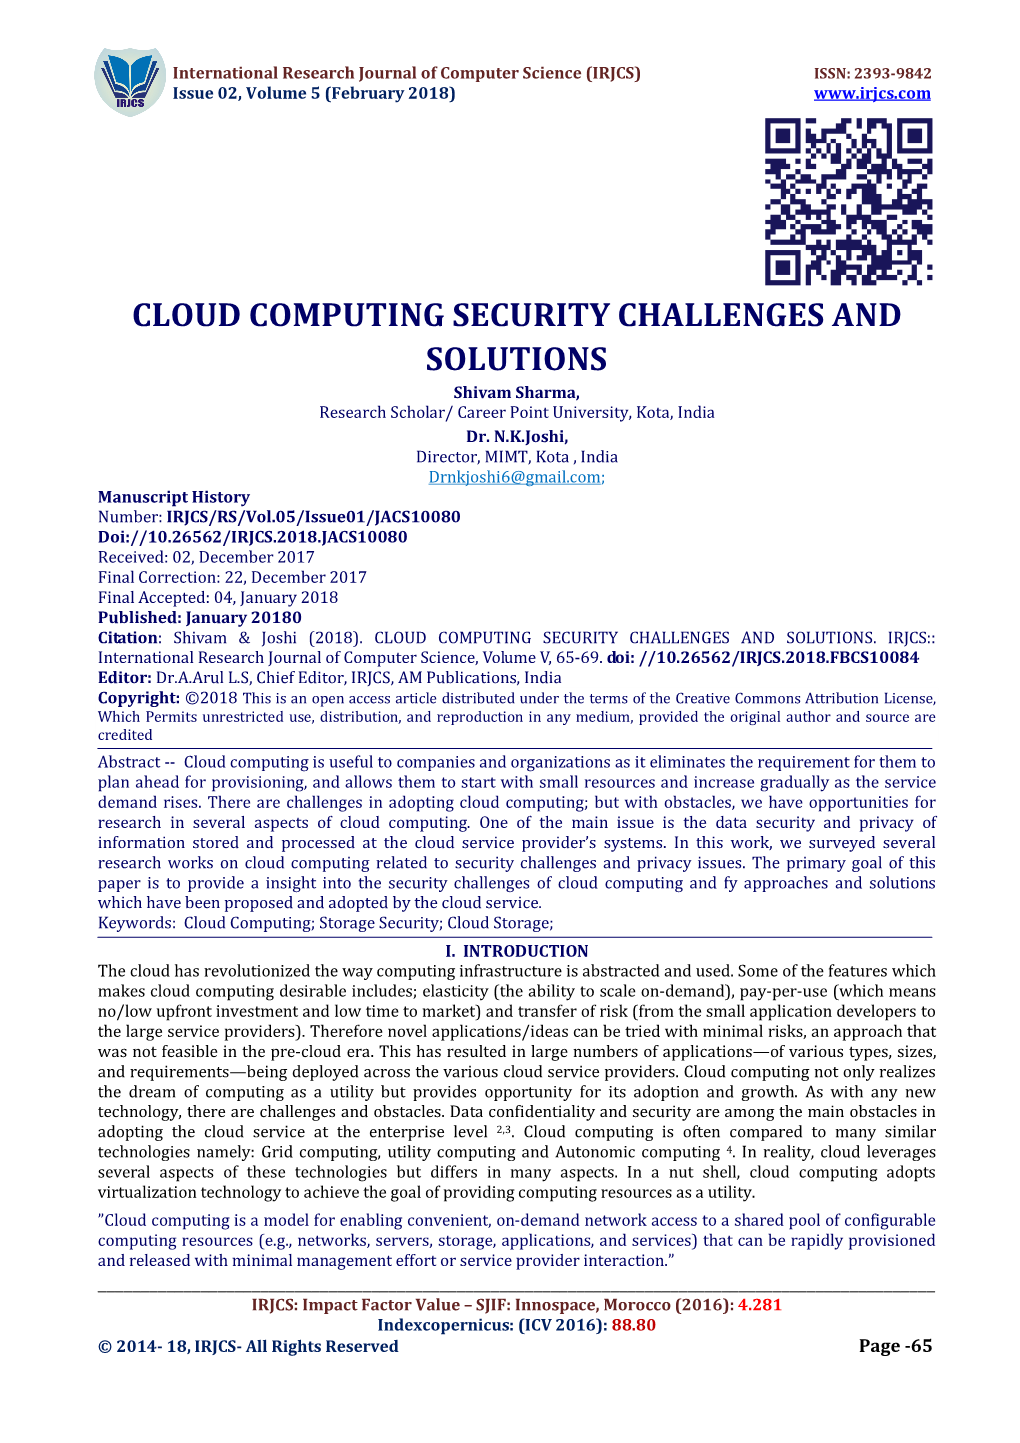 CLOUD COMPUTING SECURITY CHALLENGES and SOLUTIONS Shivam Sharma, Research Scholar/ Career Point University, Kota, India